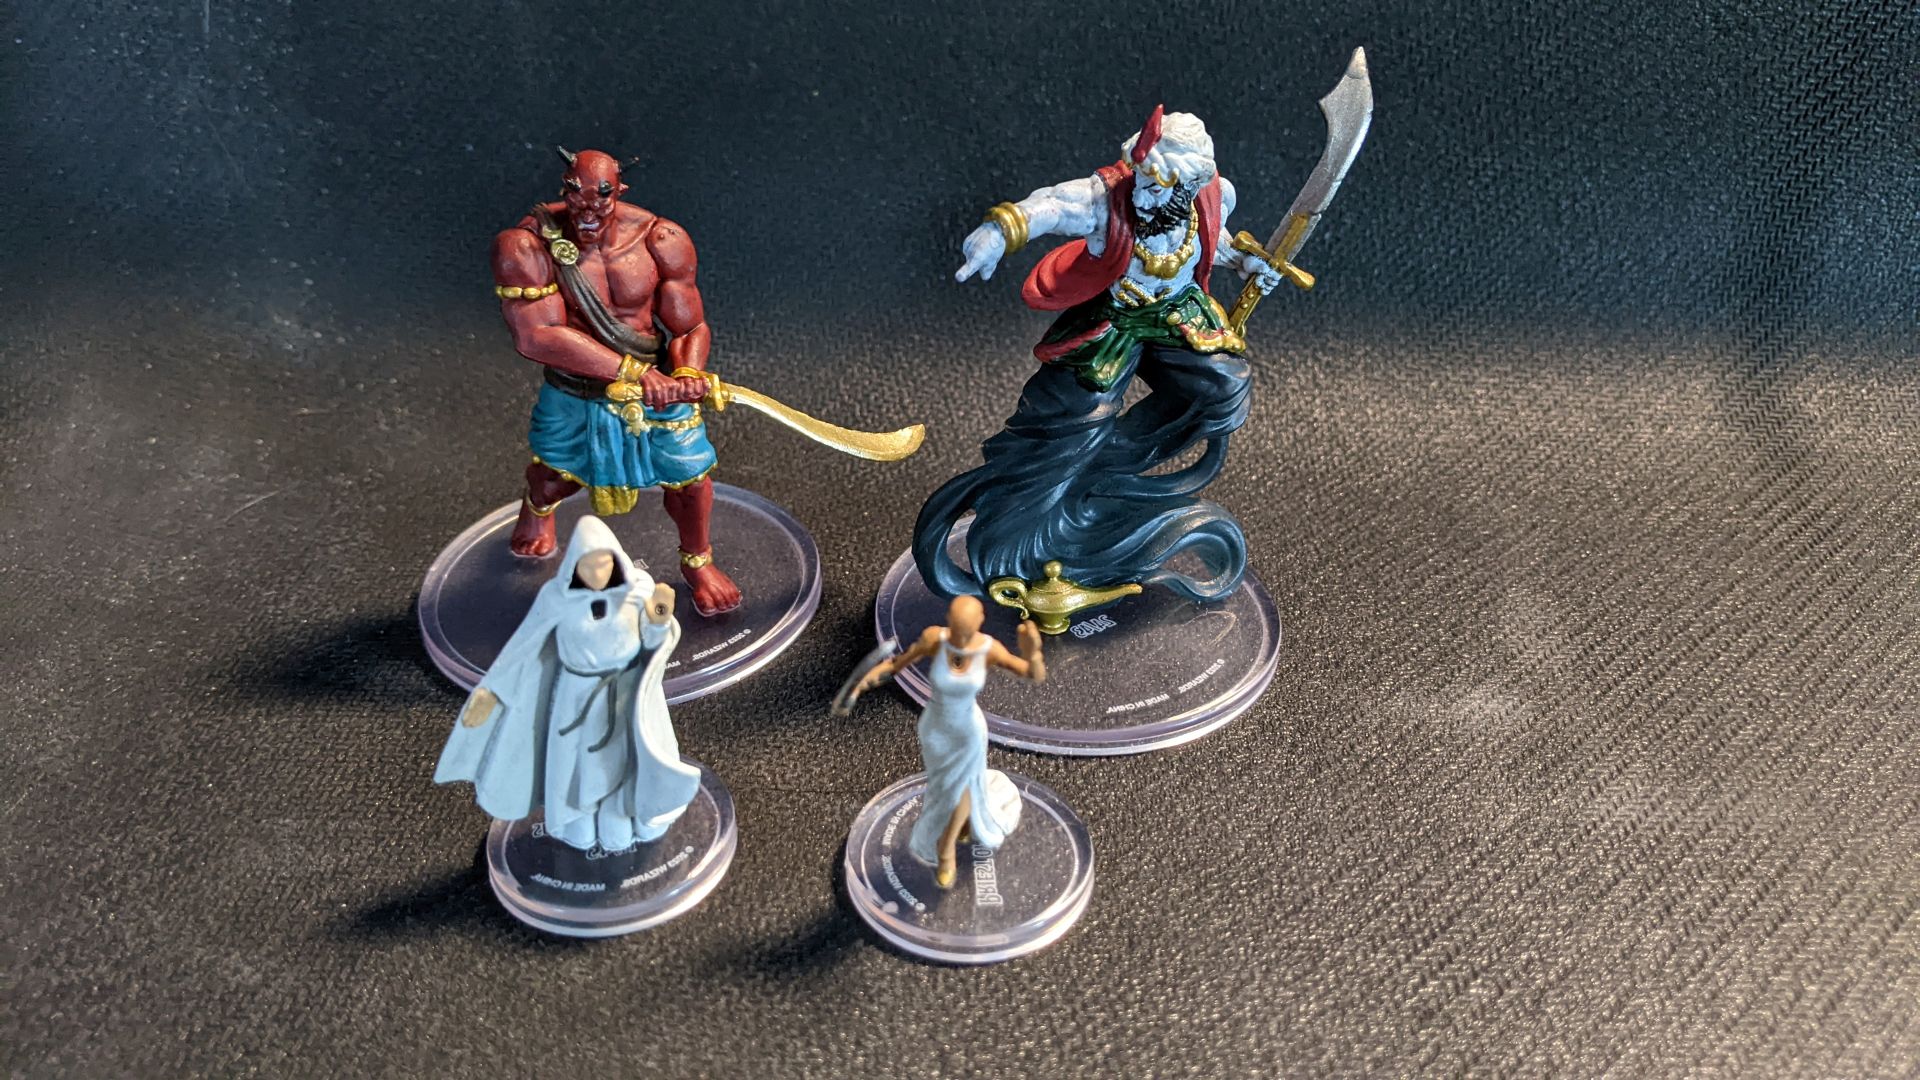 A collection of religiously based minis from Wizkids Sand and Stone Blind Box Set